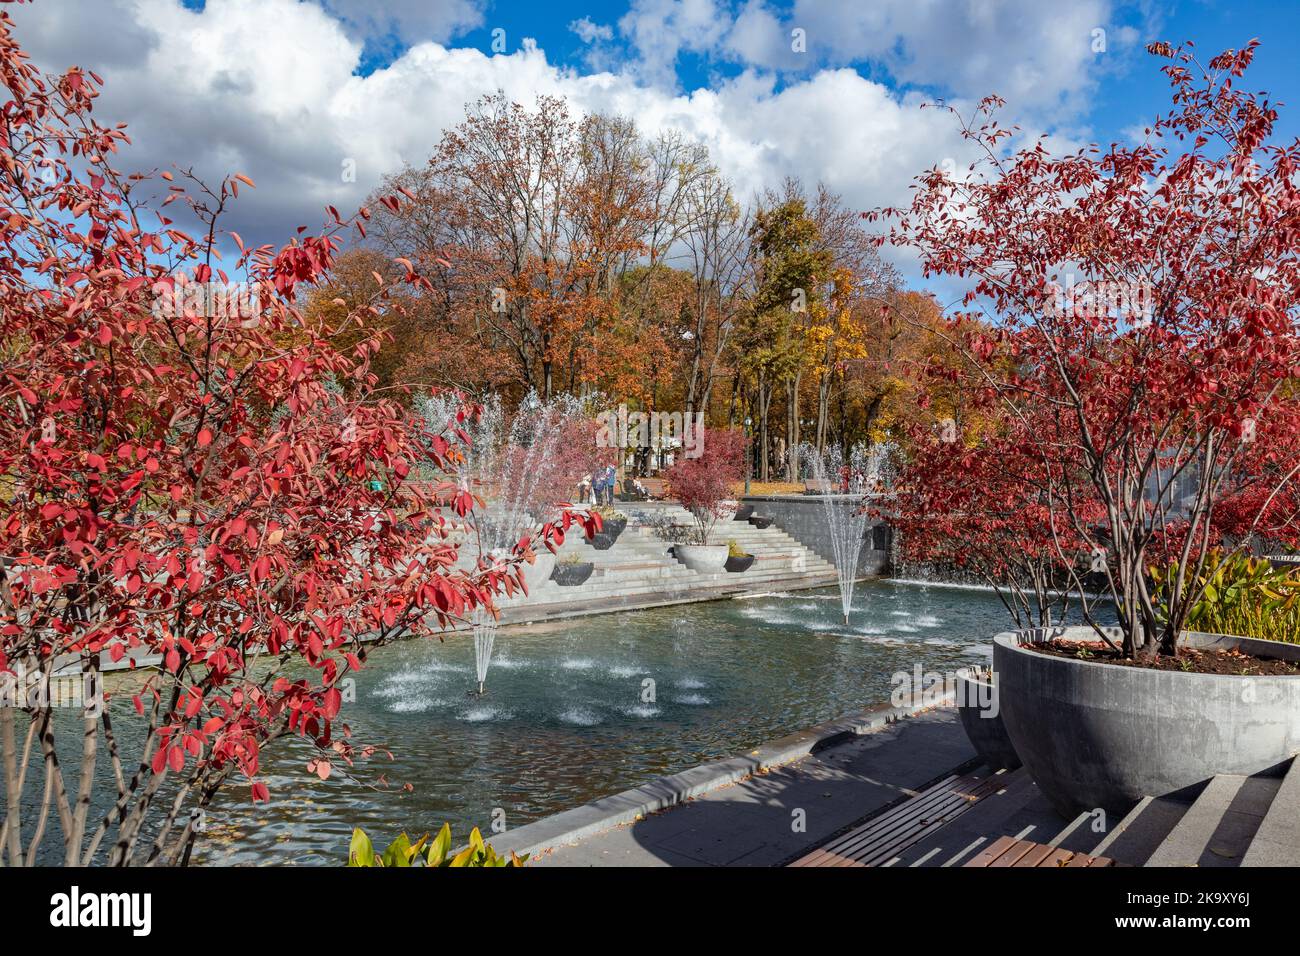 Red and golden autumn trees with fountains in recreation area in Shevchenko City Garden. Tourist attraction in city park, Kharkiv Ukraine Stock Photo